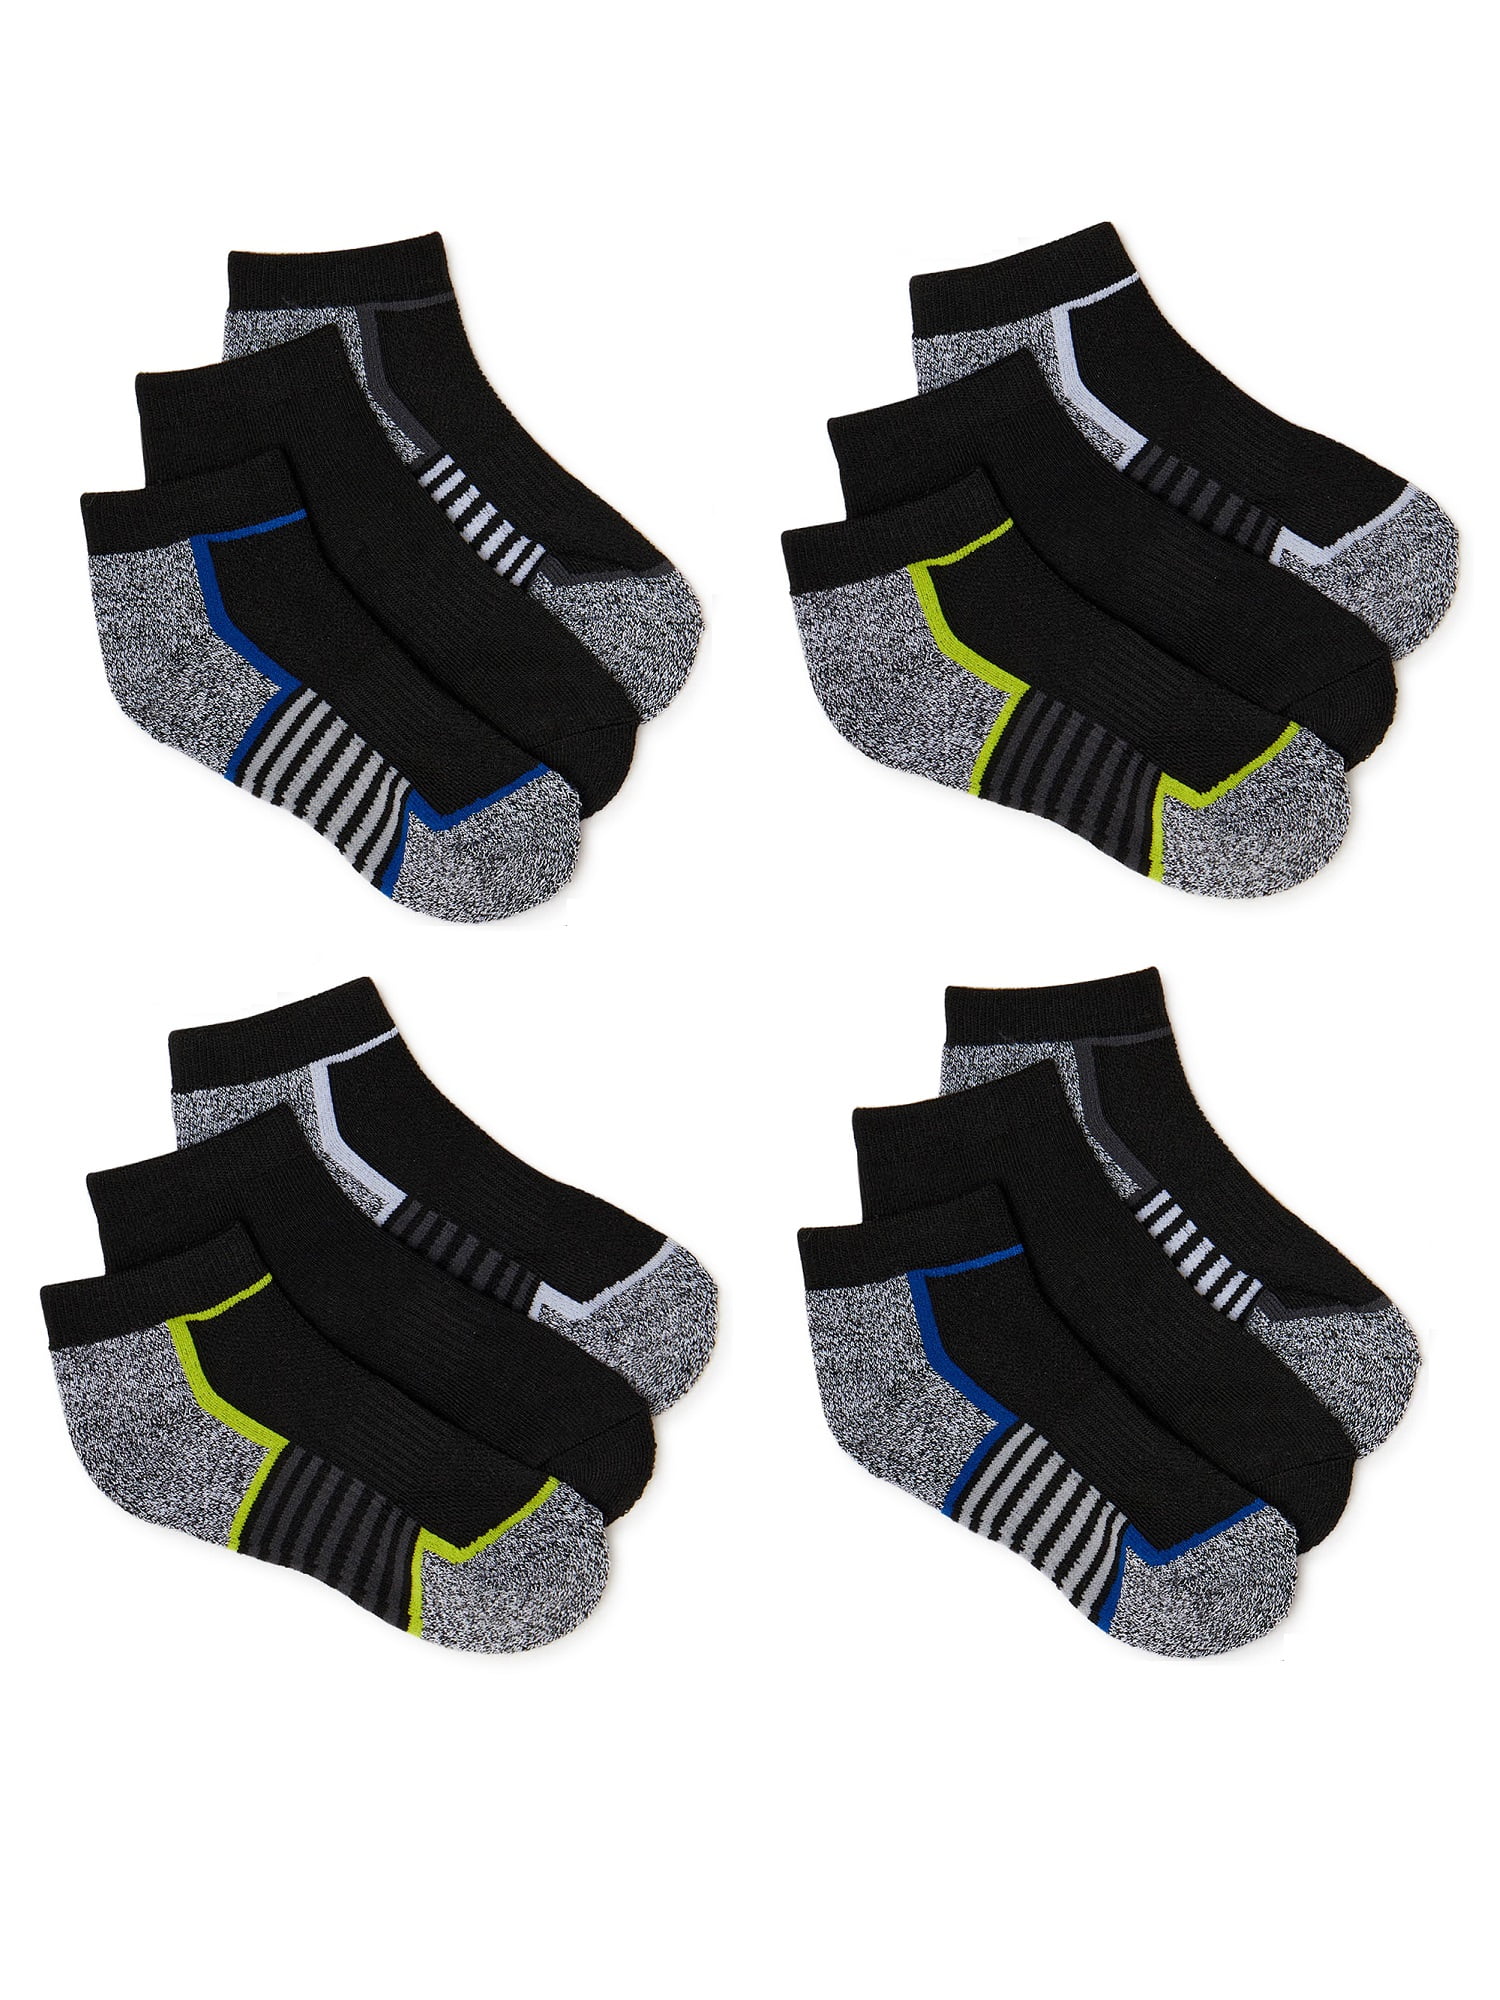 Hind Light Weight Running Socks 2 Pack SIZE/M 